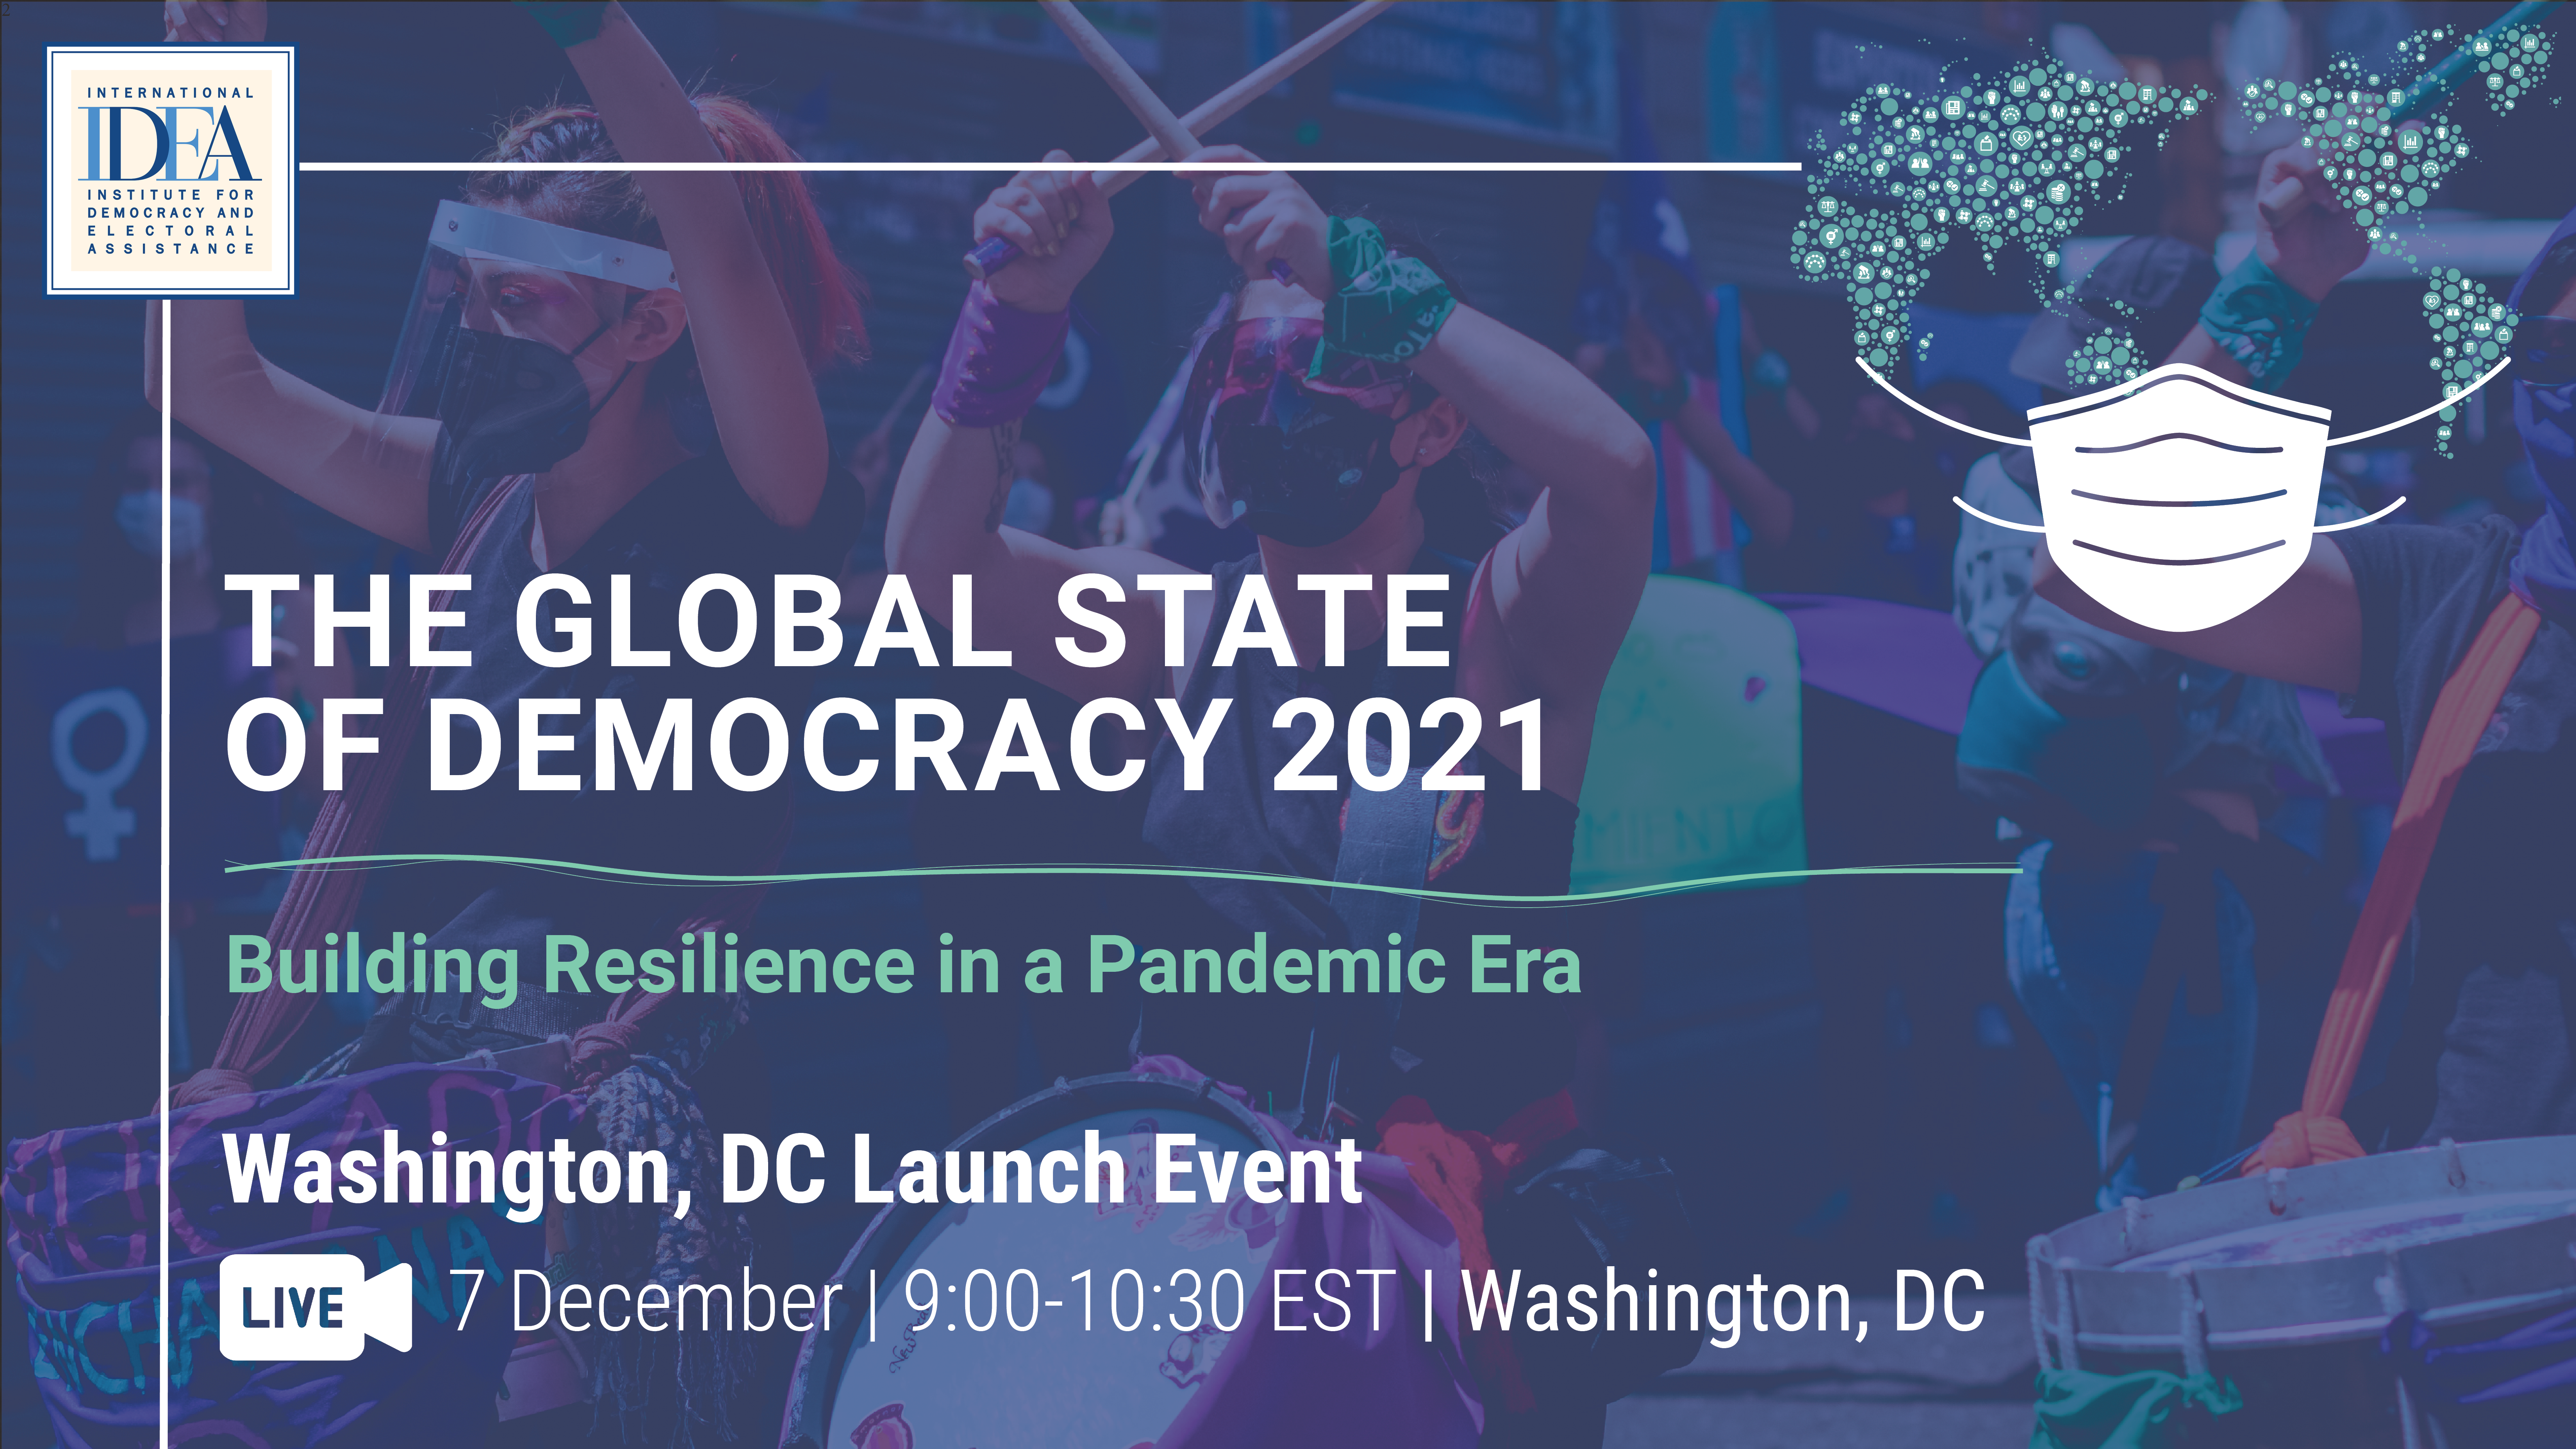 The Global State of Democracy 2021 Report Events | International